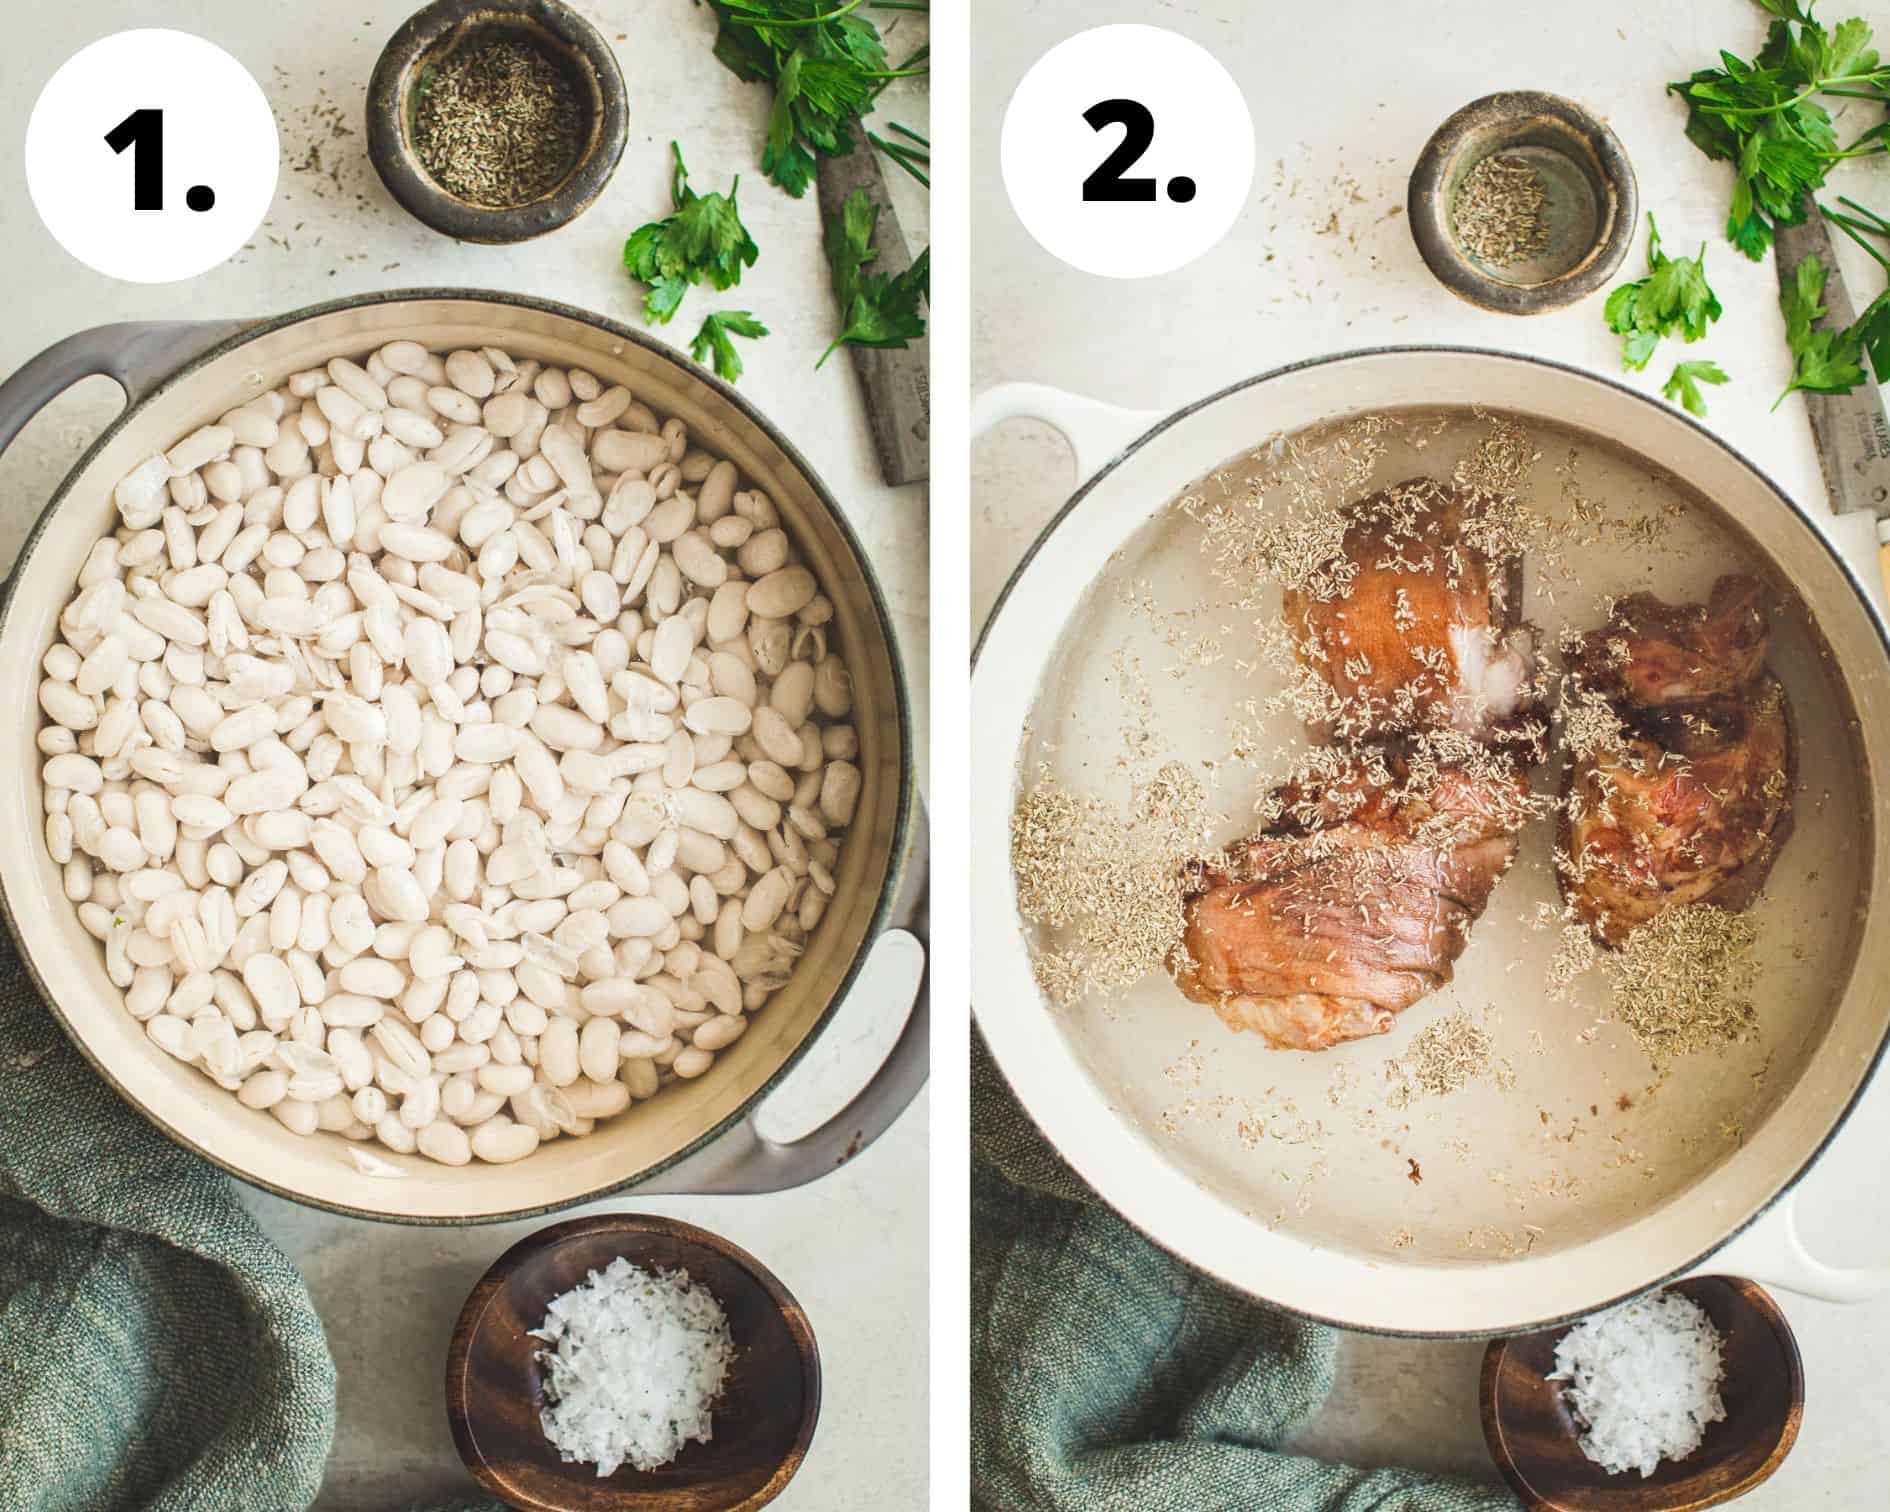 Ham and white bean soup process steps 1 and 2.